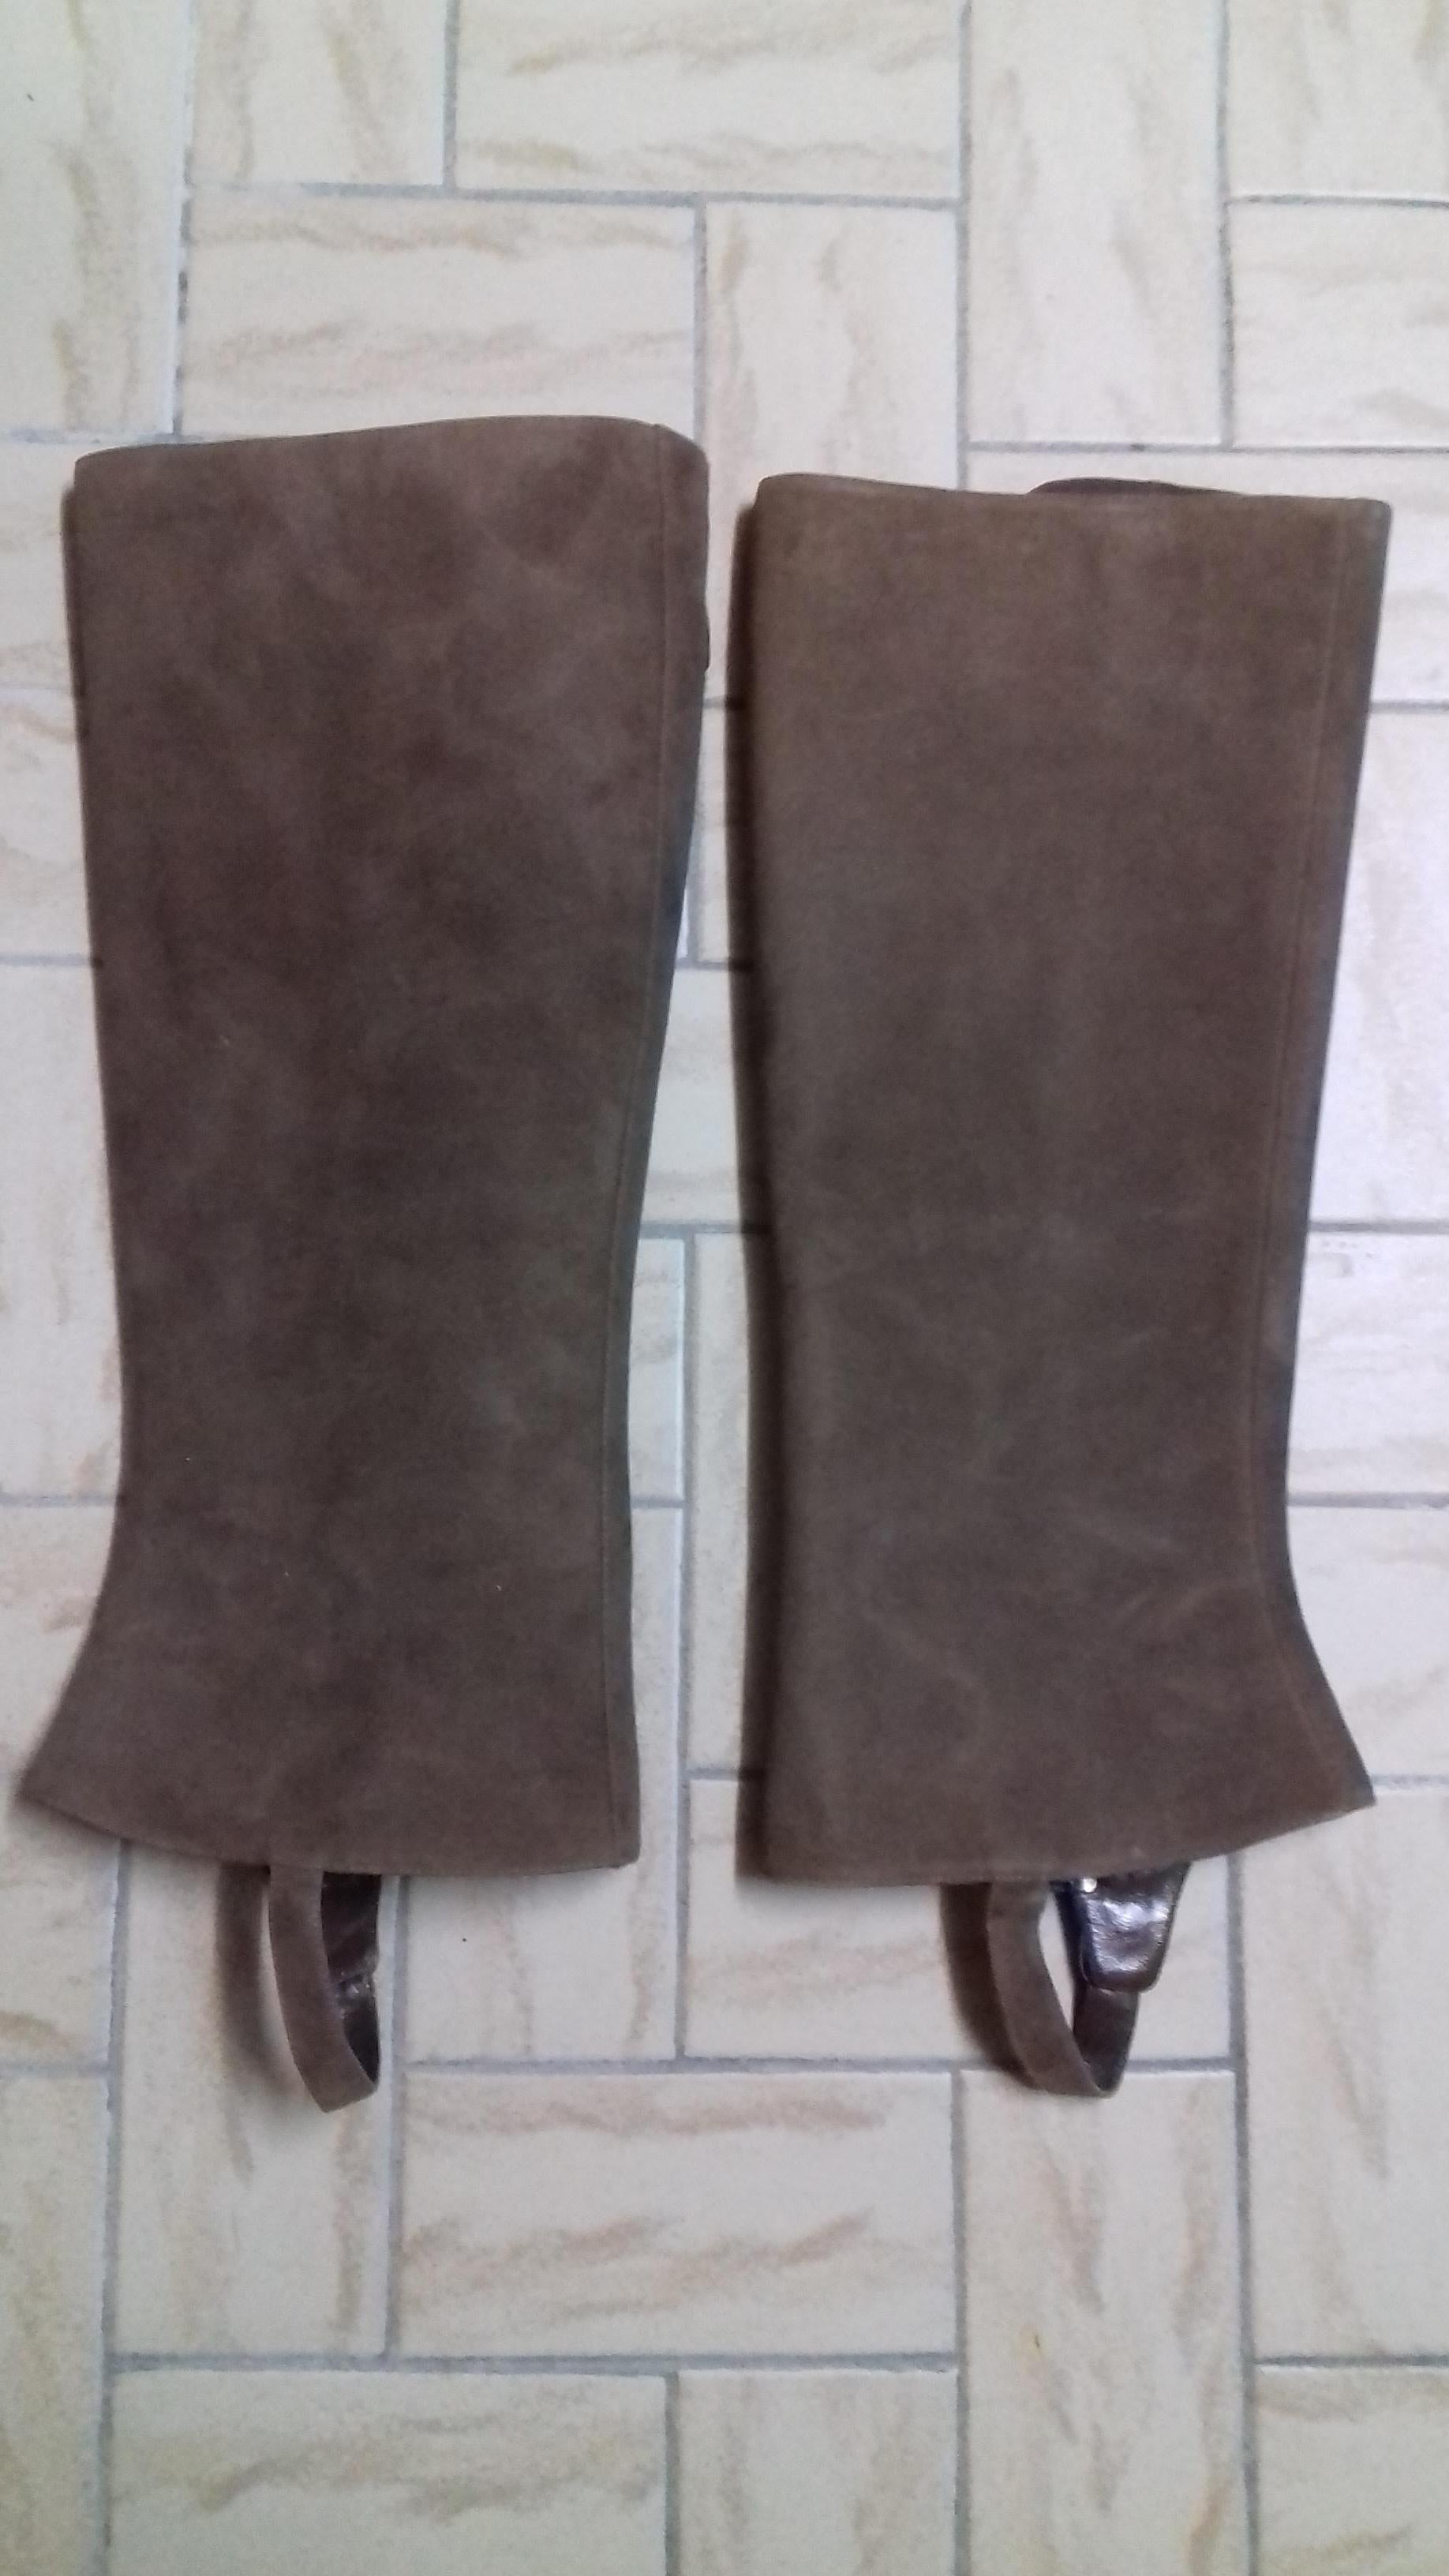 Rare and Beautiful Authentic Hermès Chaps

Made of Suede Leather and Silver-Tone Buckles

Inside is lined with a plastic material

Closes by hidden zipper and 3 buckles

